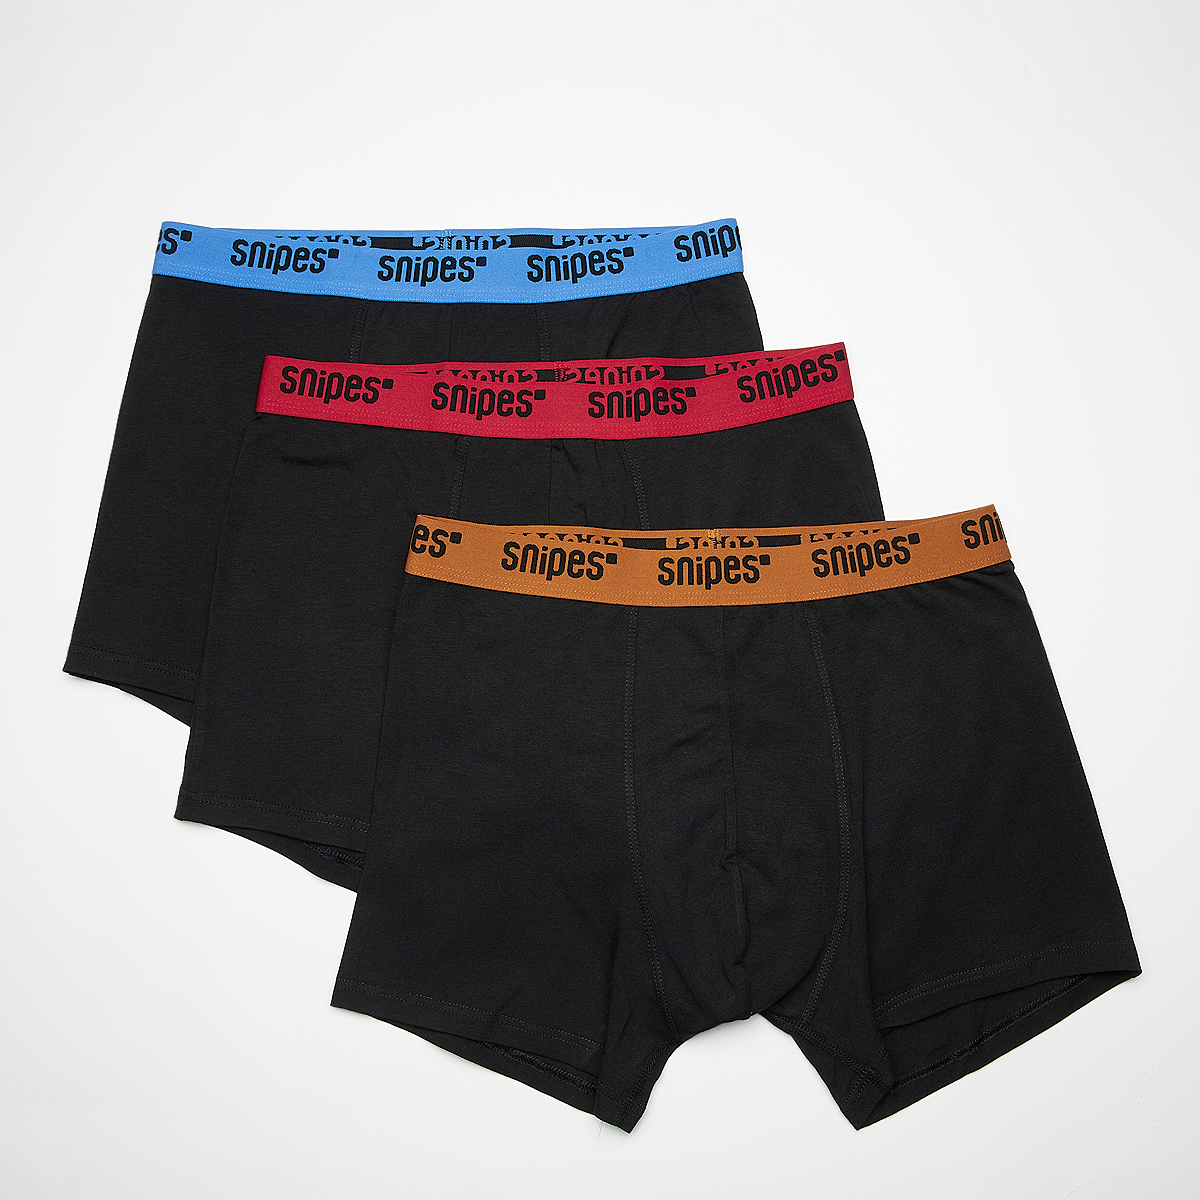 Contrast Tape Briefs Boxershorts (3 Pack)